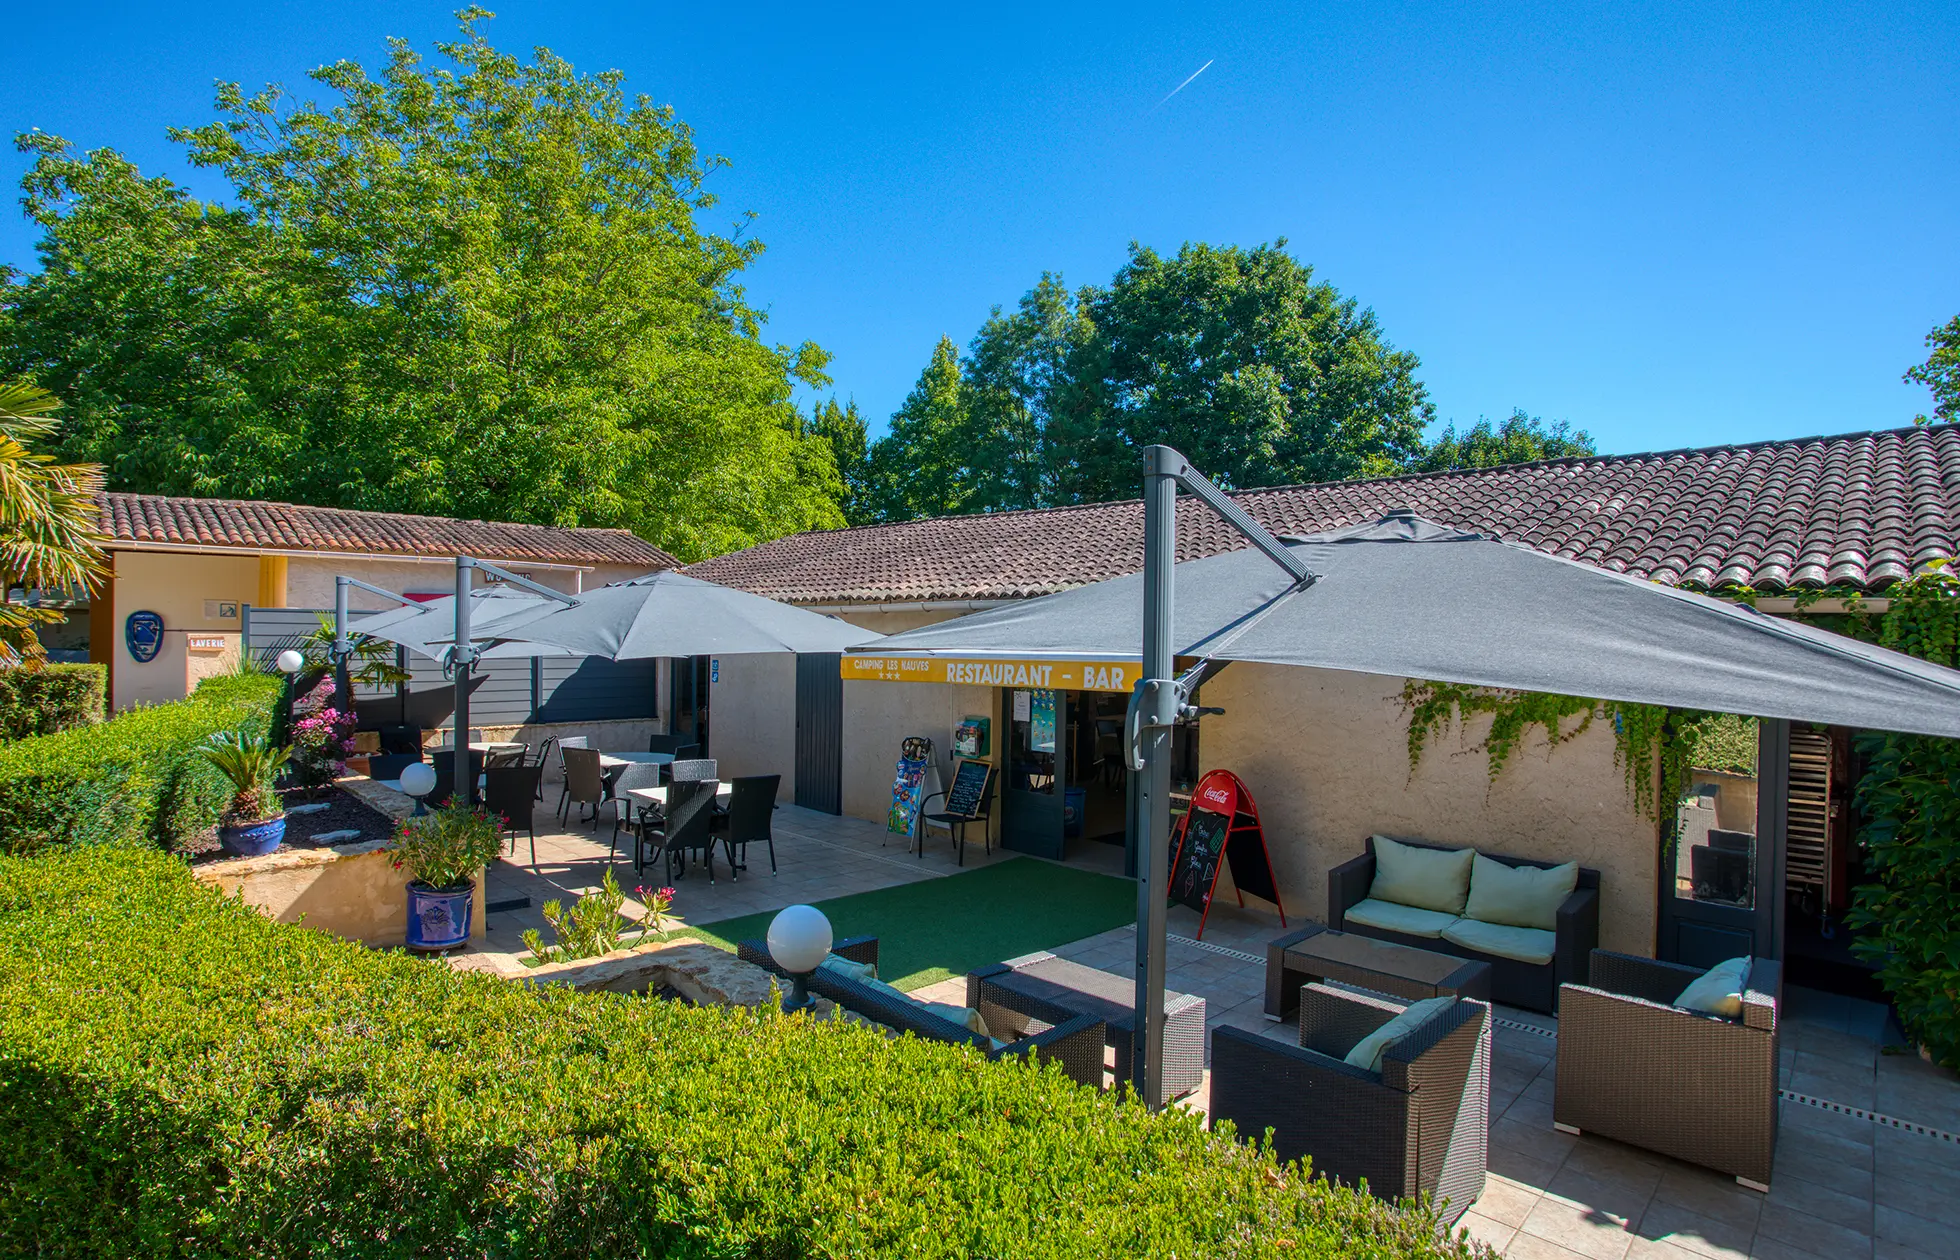 offer ' - '28 - Camping Les Nauves - Service